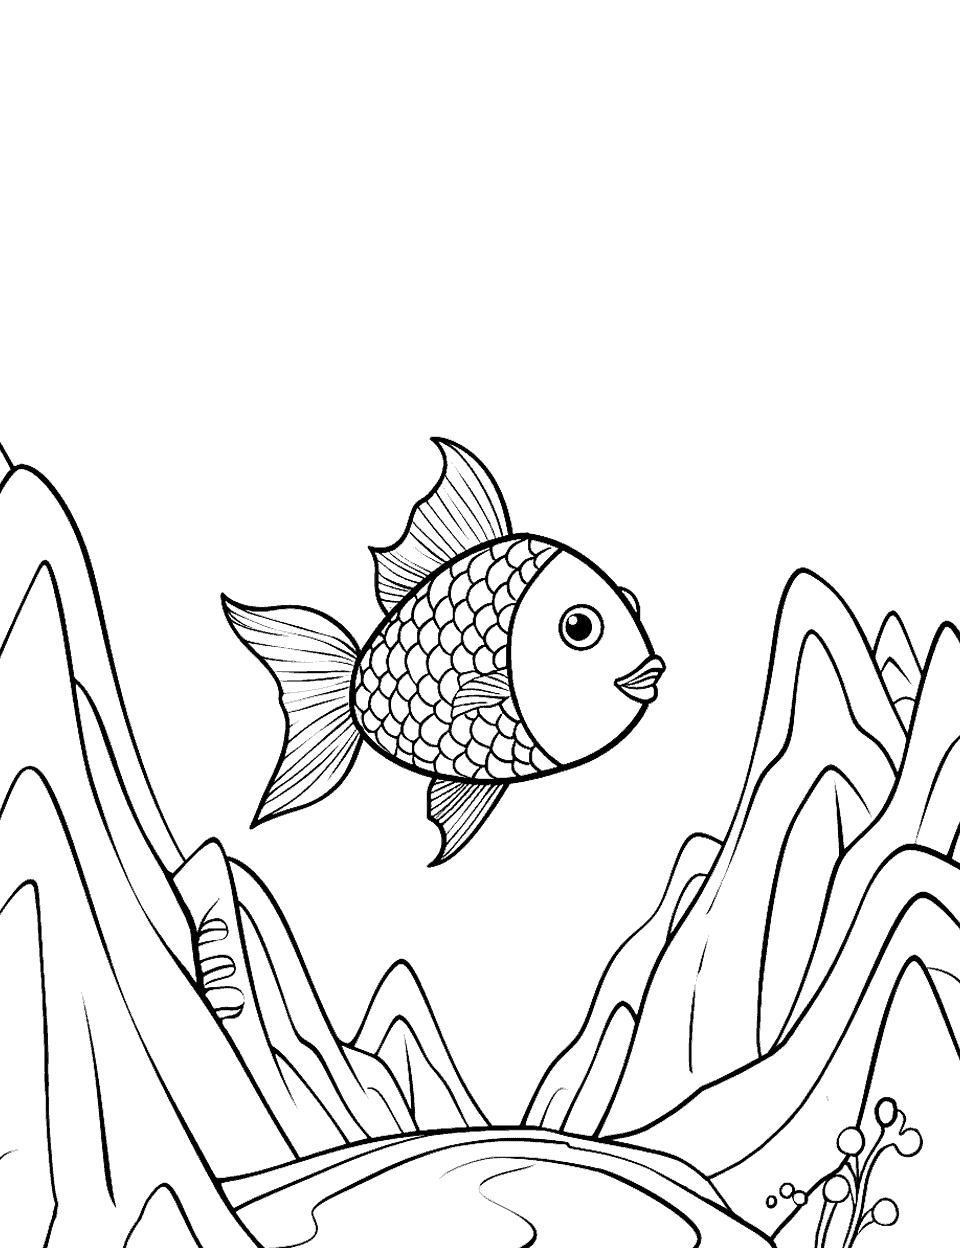 Fishy Mountain Adventure Fish Coloring Page - Fish climbing underwater mountains and enjoying the view.